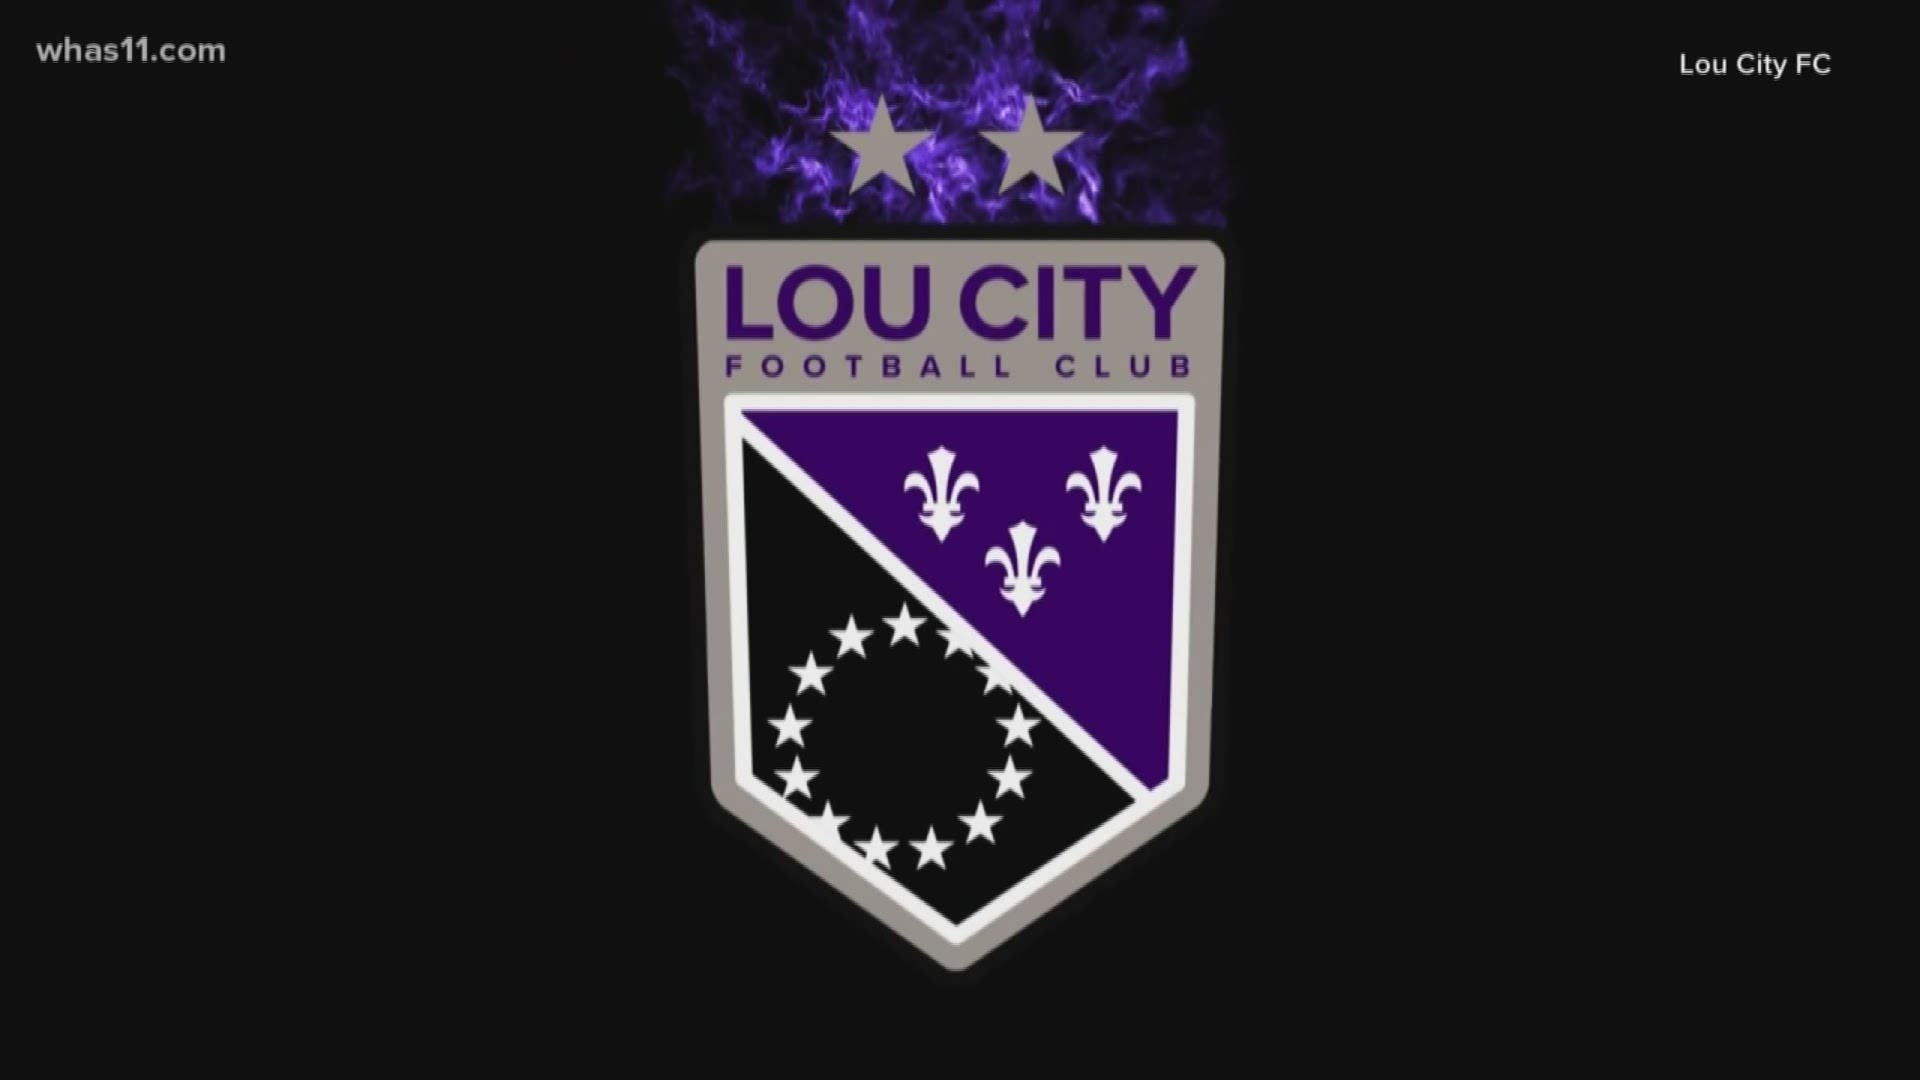 According to a statement from Louisville City FC President Brad Estes, the recent brand rollout has failed.